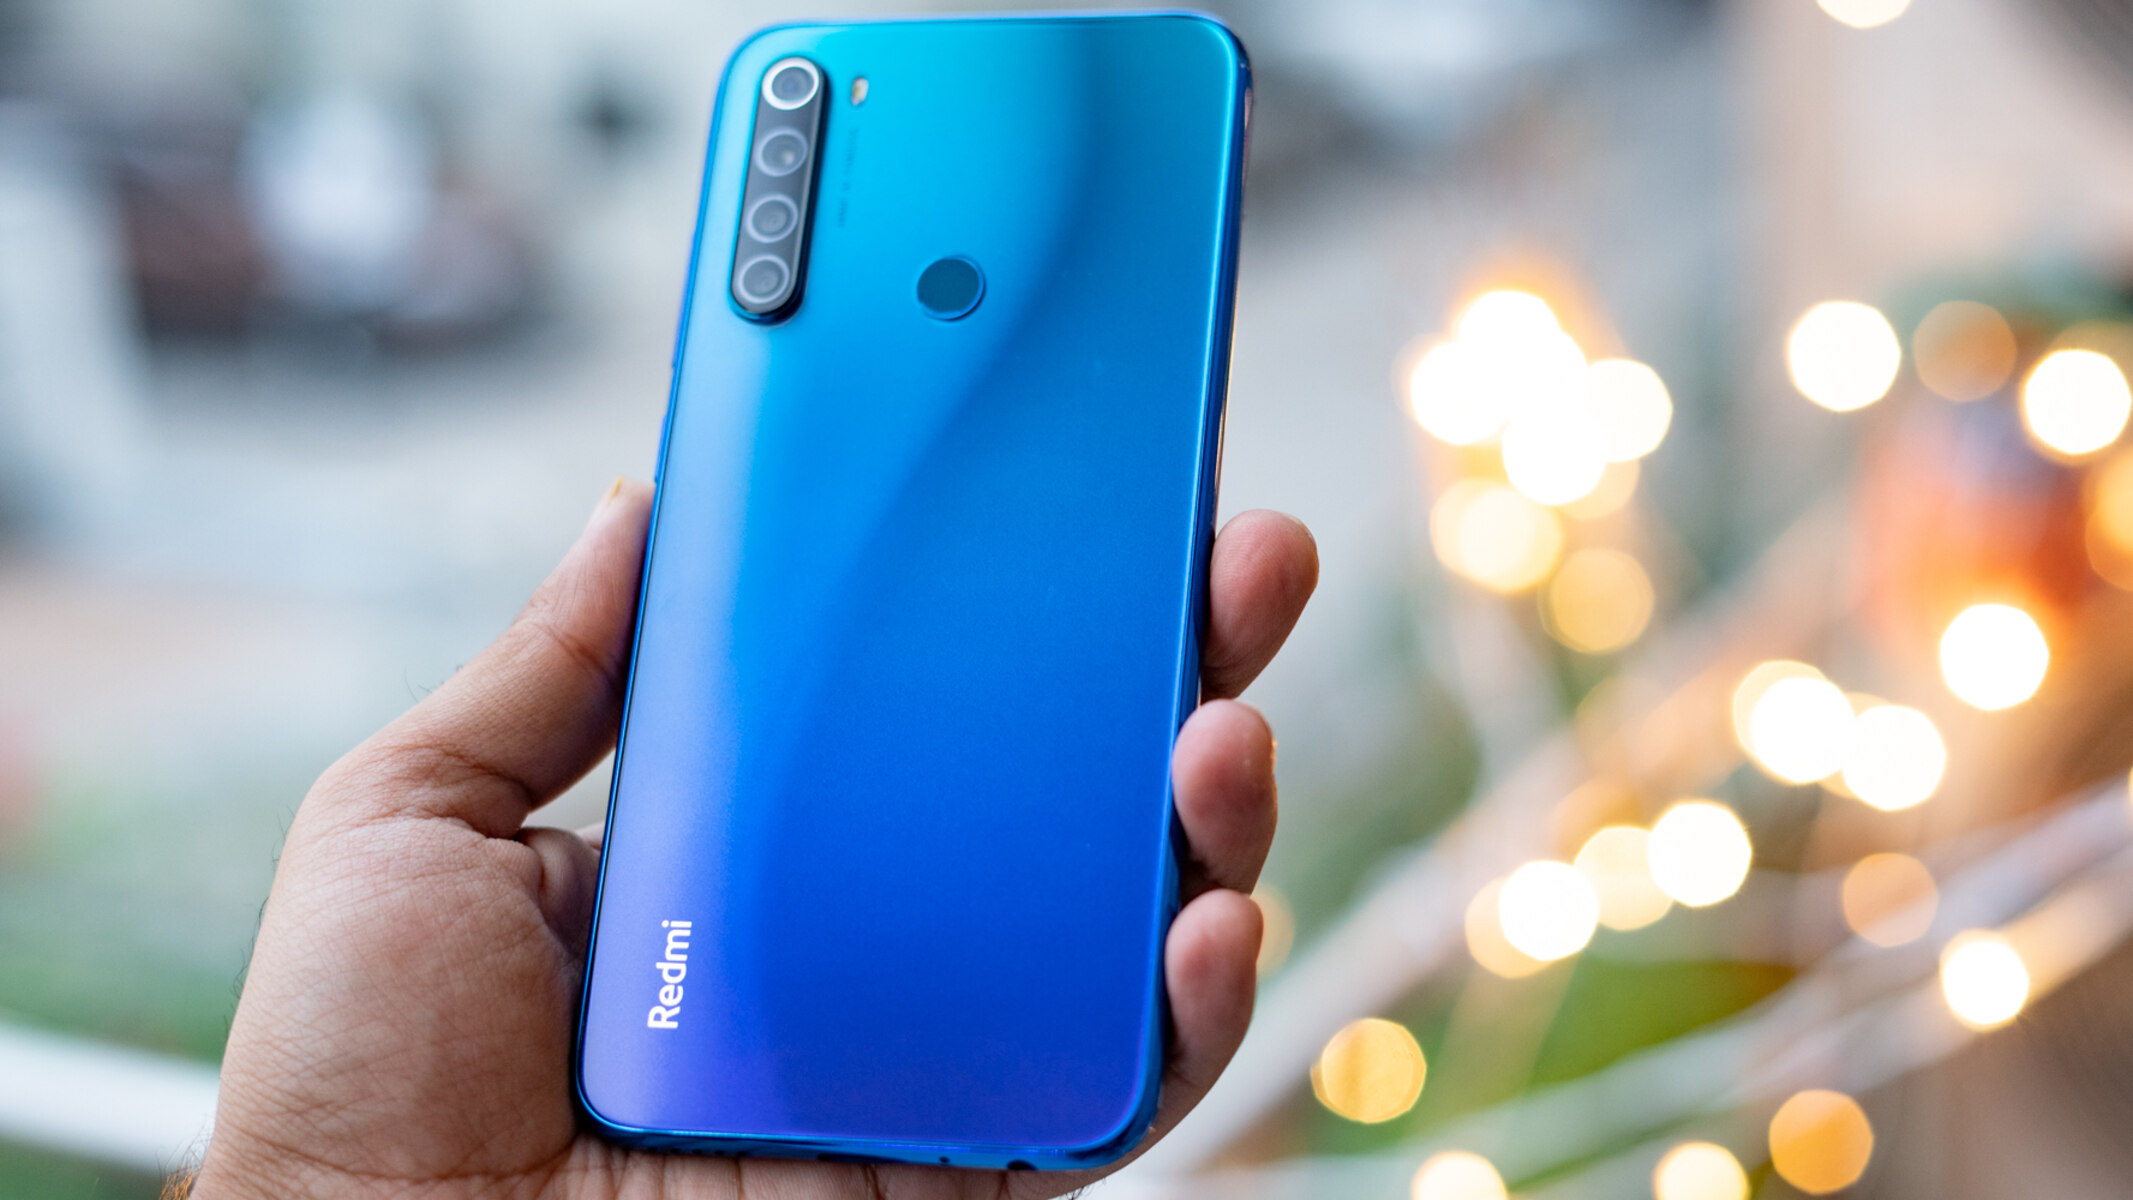 Blocking Unknown Numbers On Redmi Note 8: A Quick And Effective How-To